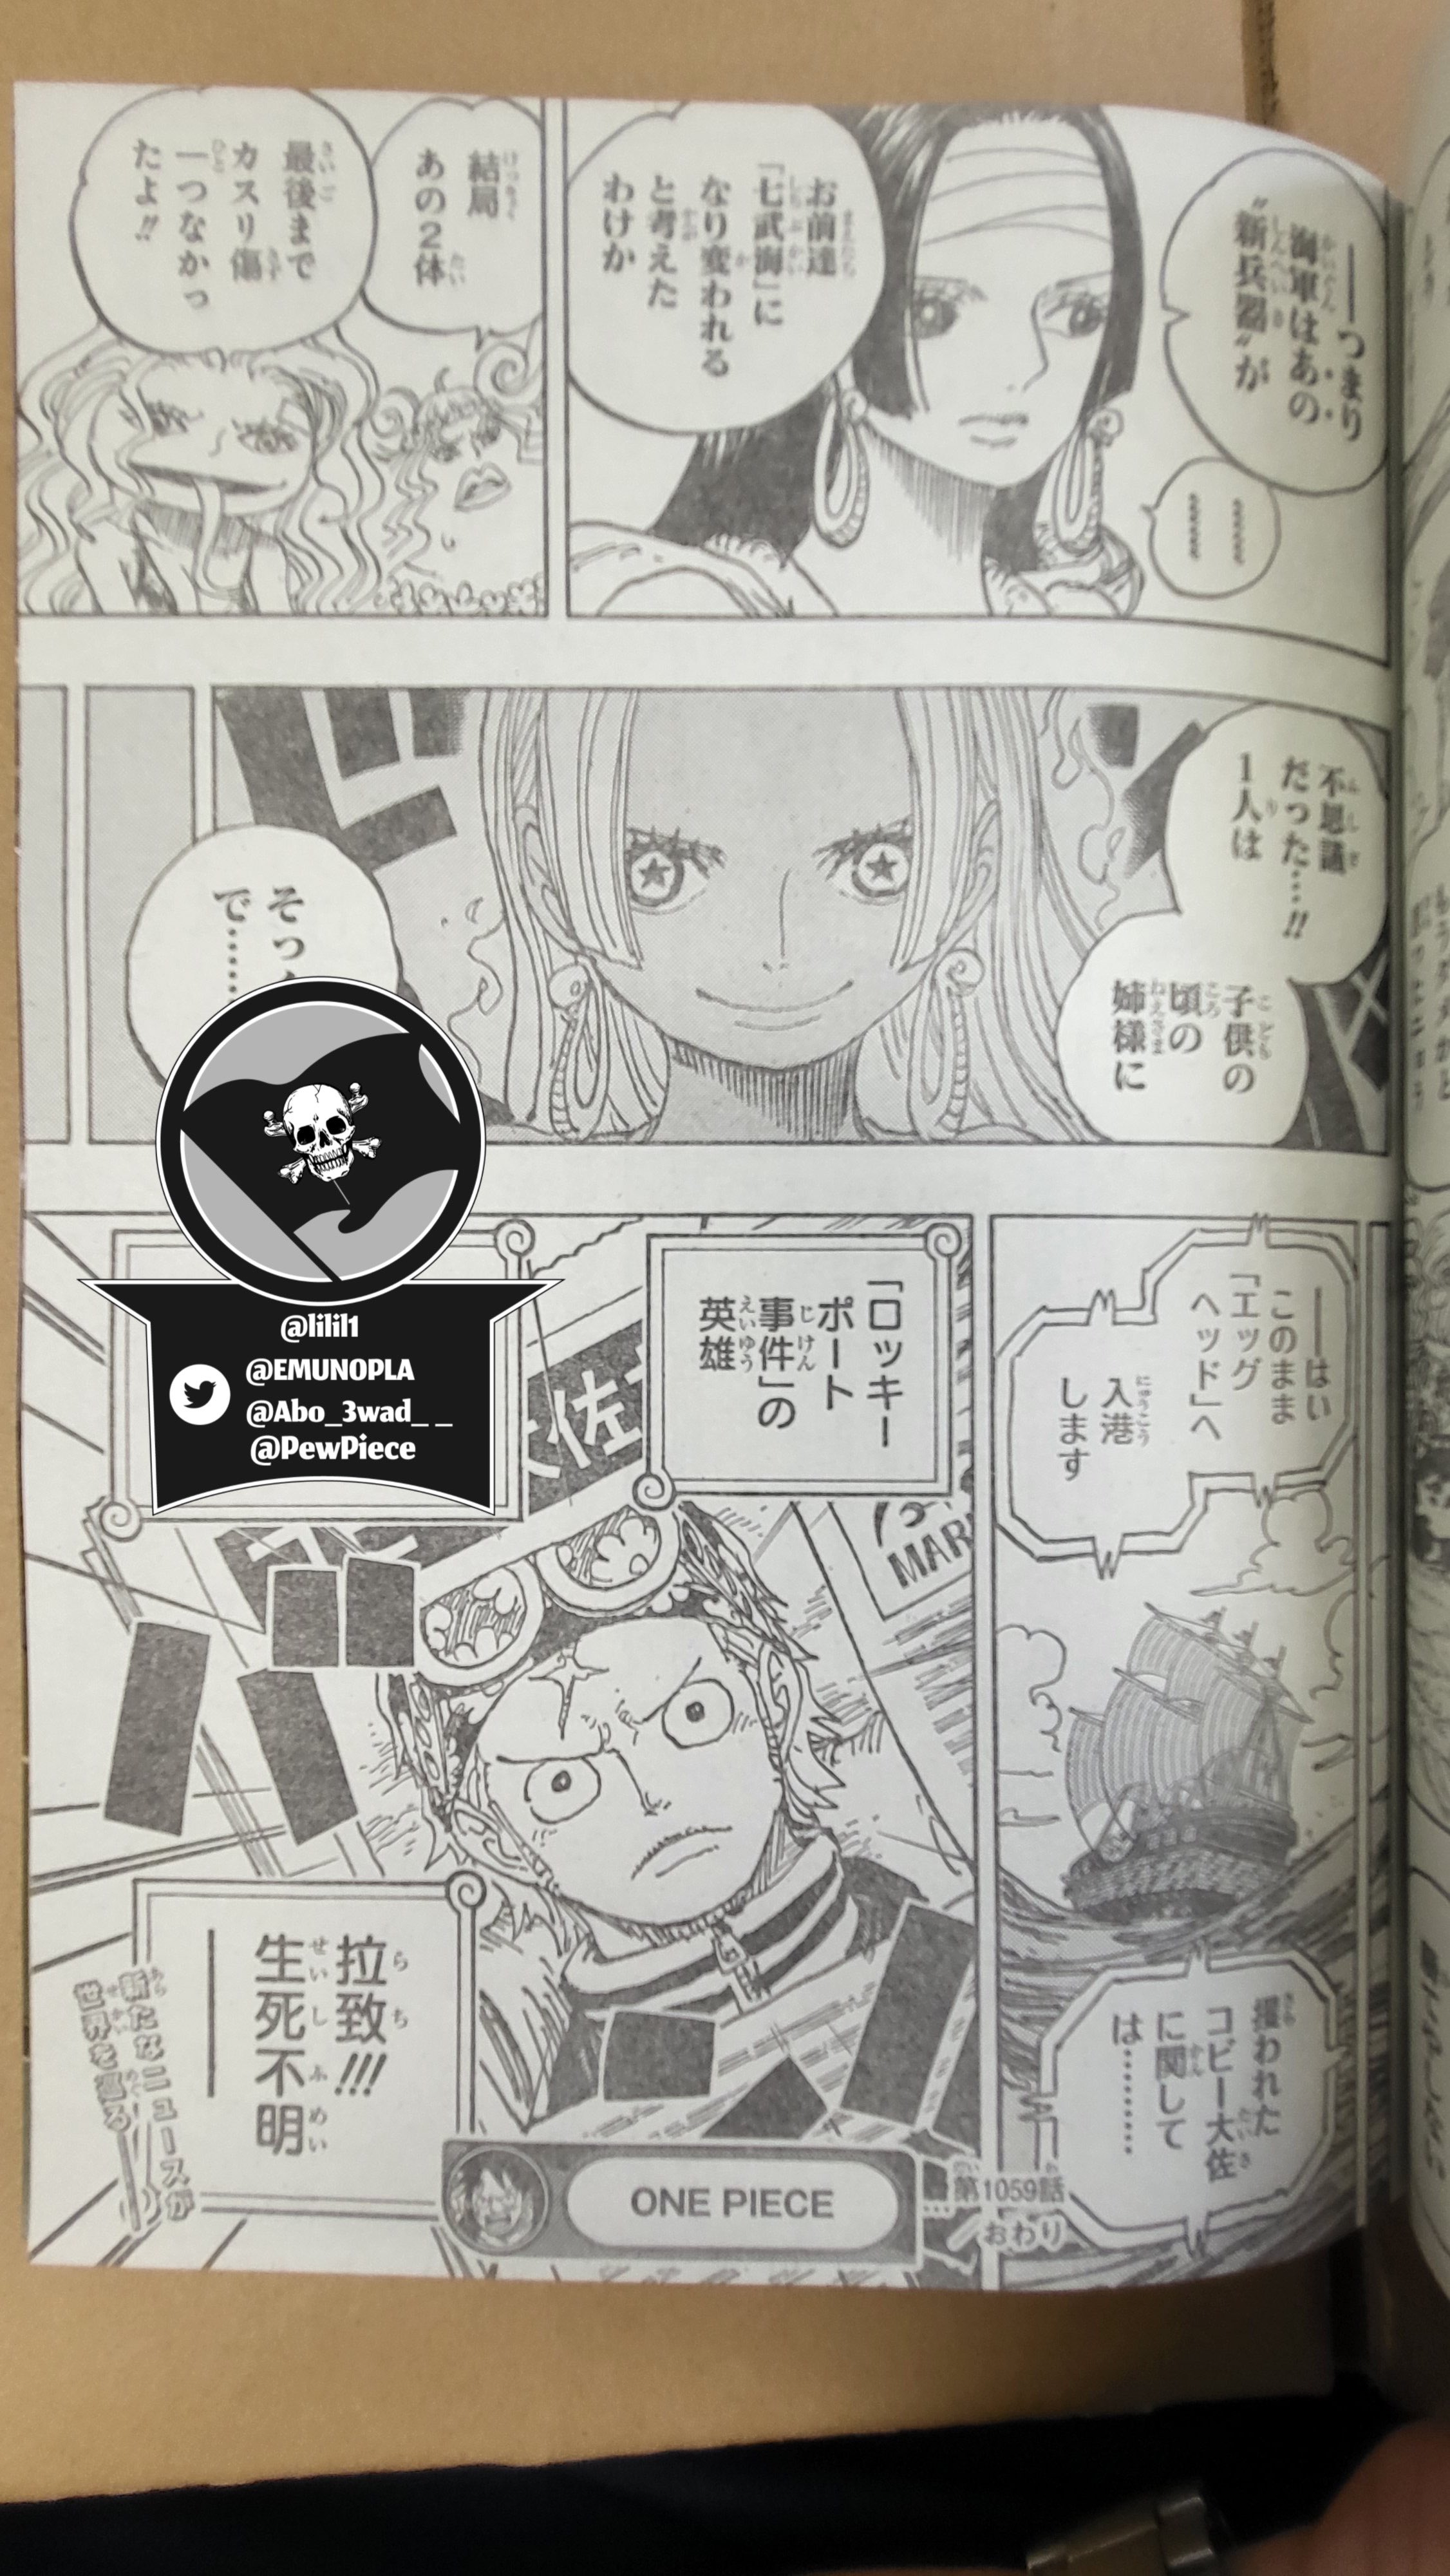 1058 spoilers] Chapter 1058 last page double spread scan. : r/Piratefolk